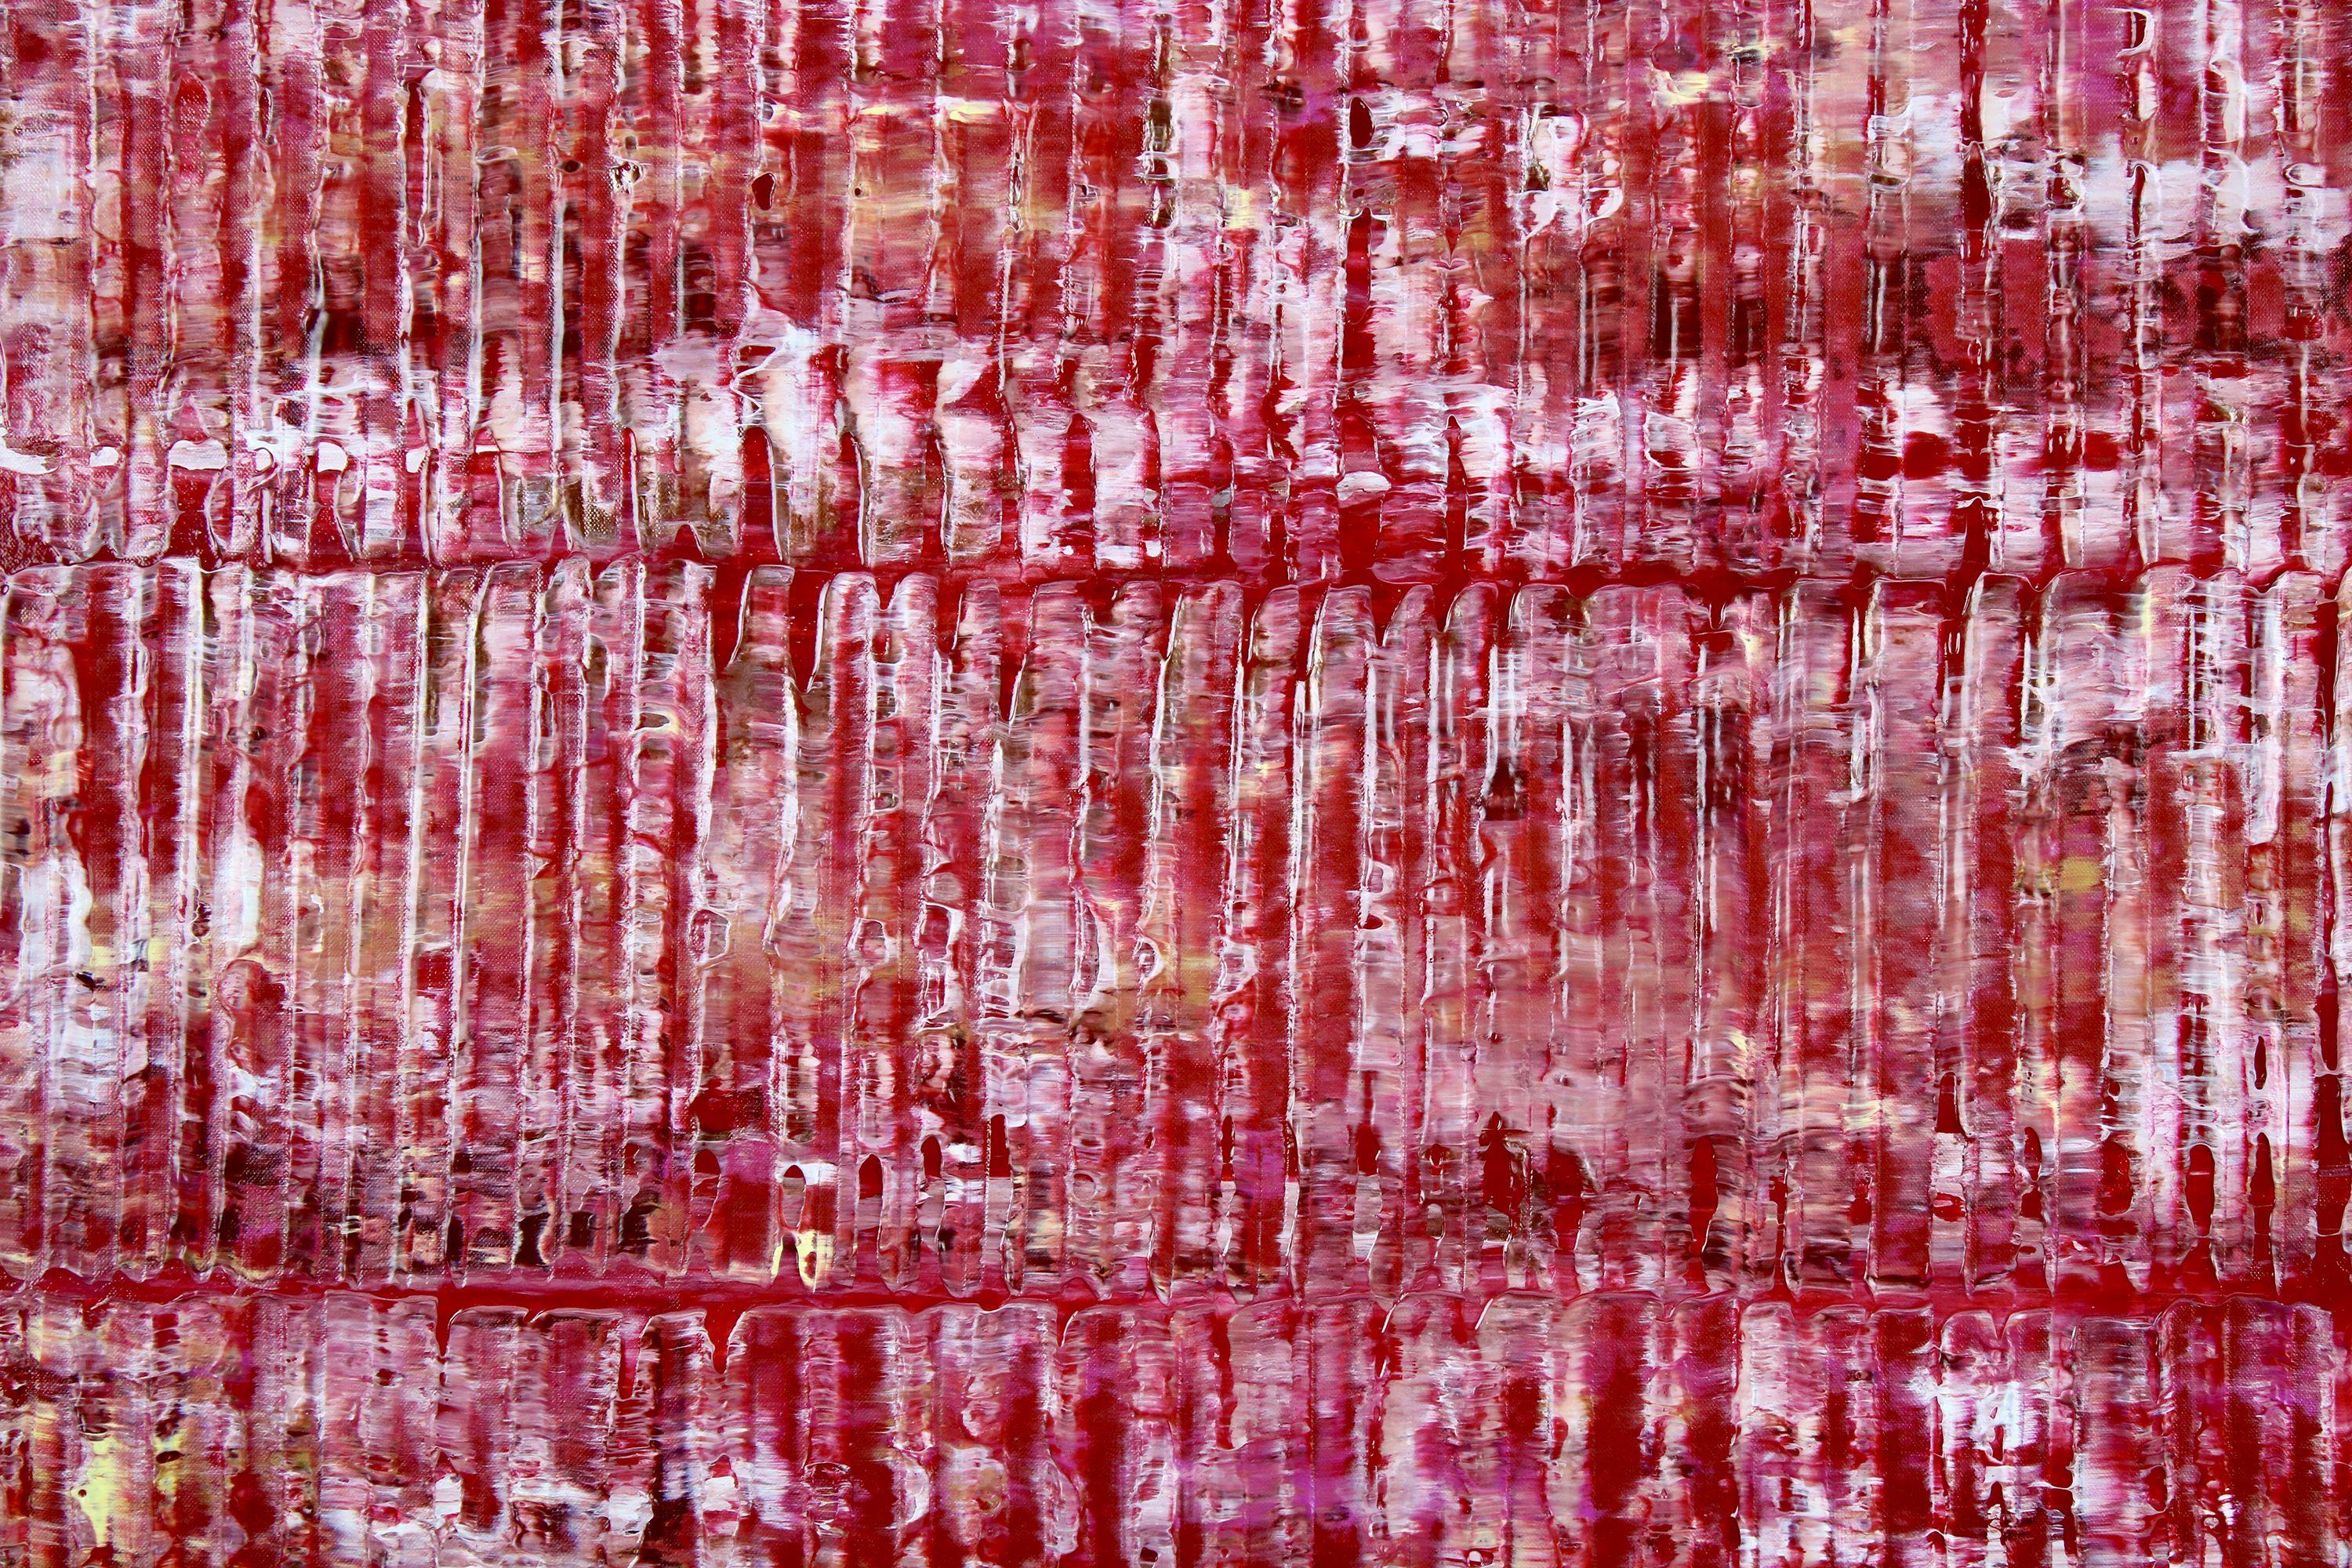 Chaos and lights, Painting, Acrylic on Canvas - Red Abstract Painting by Nestor Toro